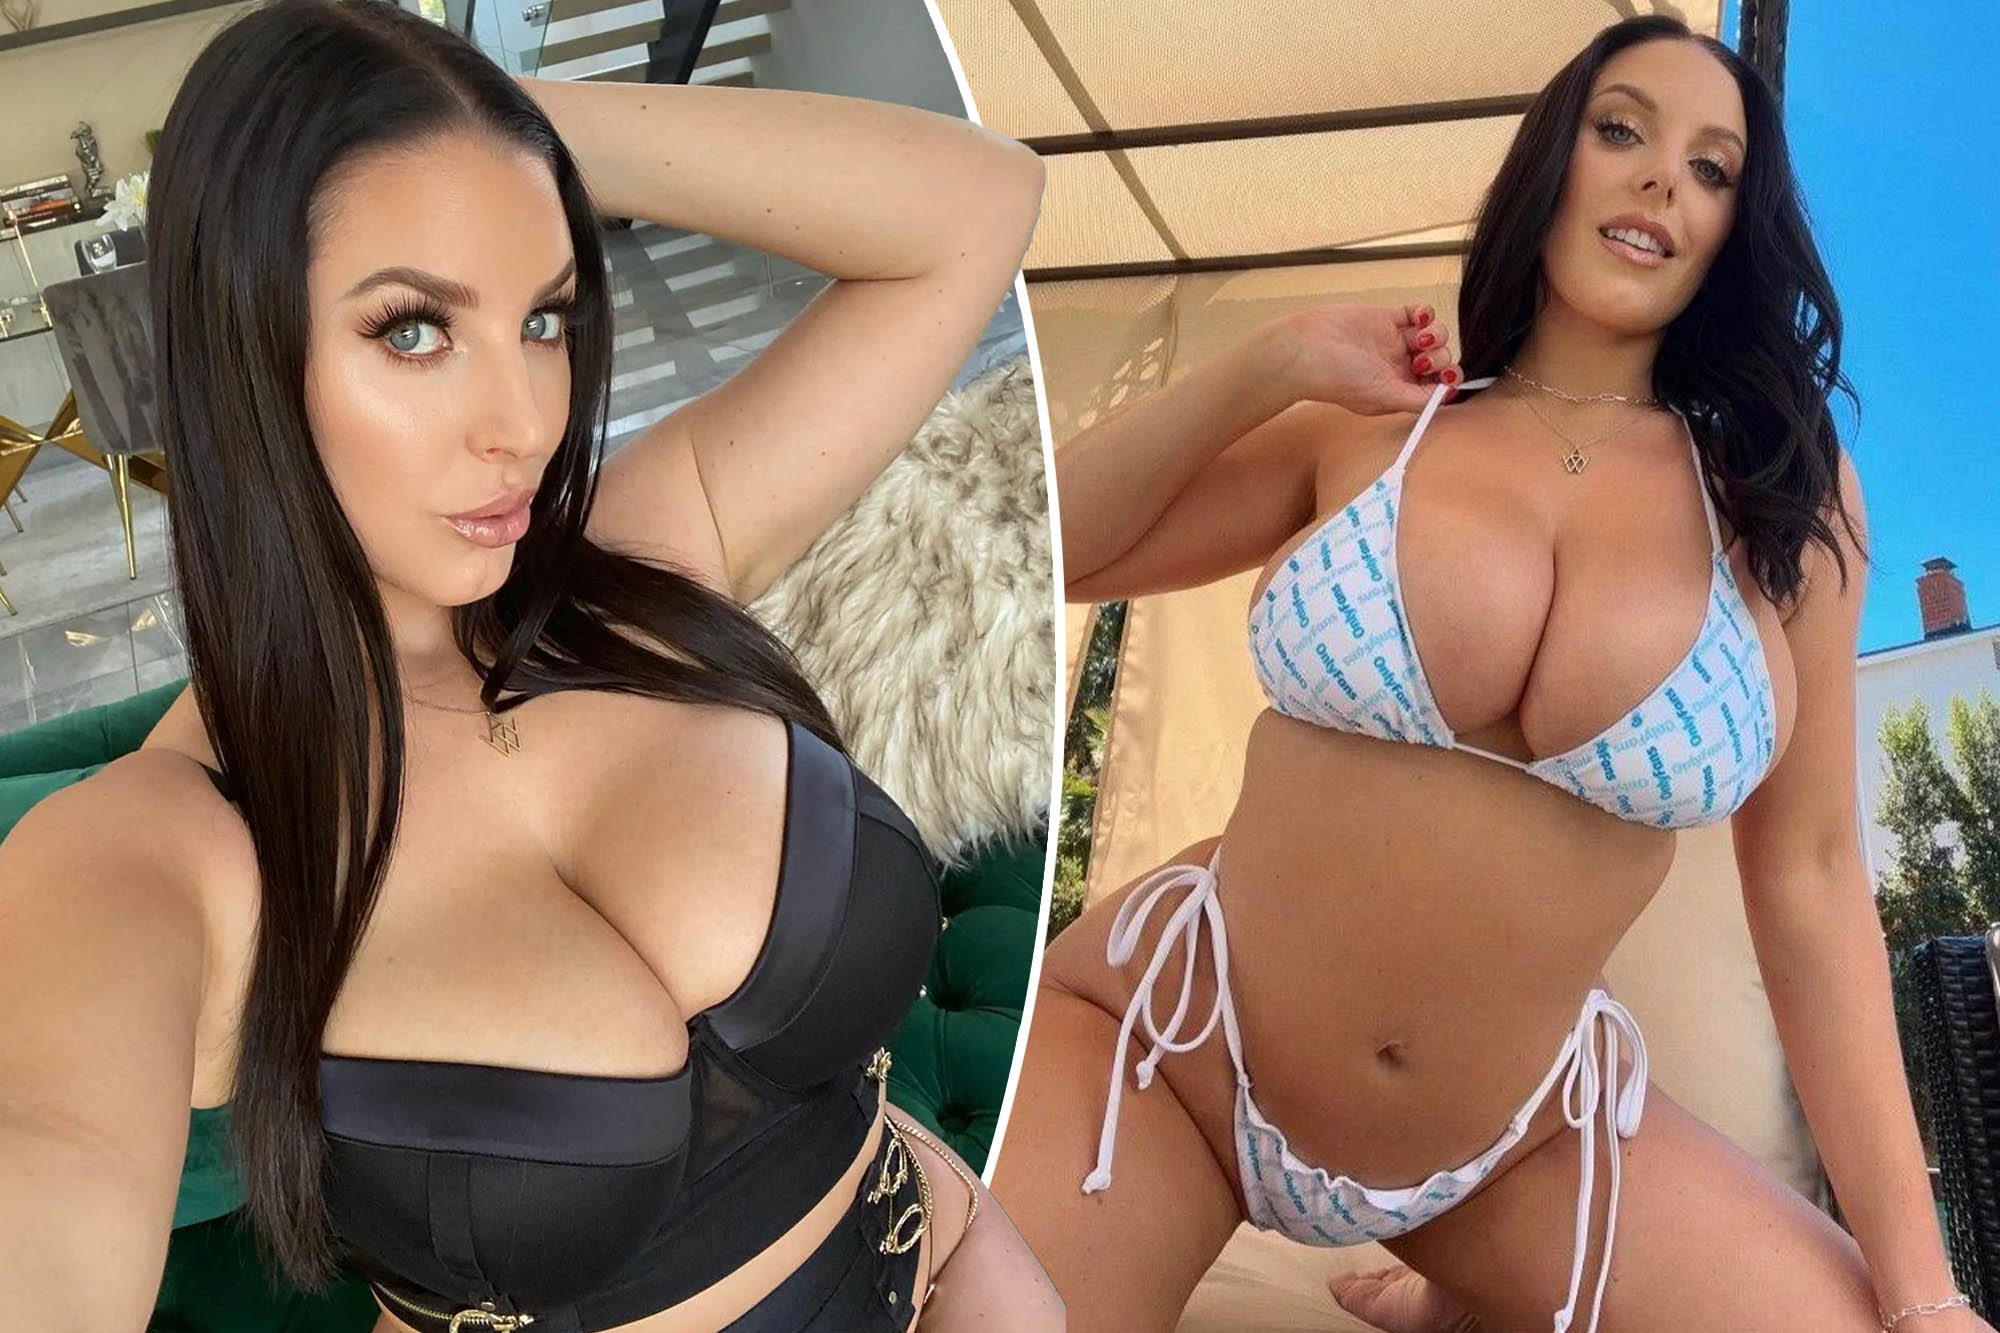 Porn star Angela White nearly died after shooting grueling scene ...